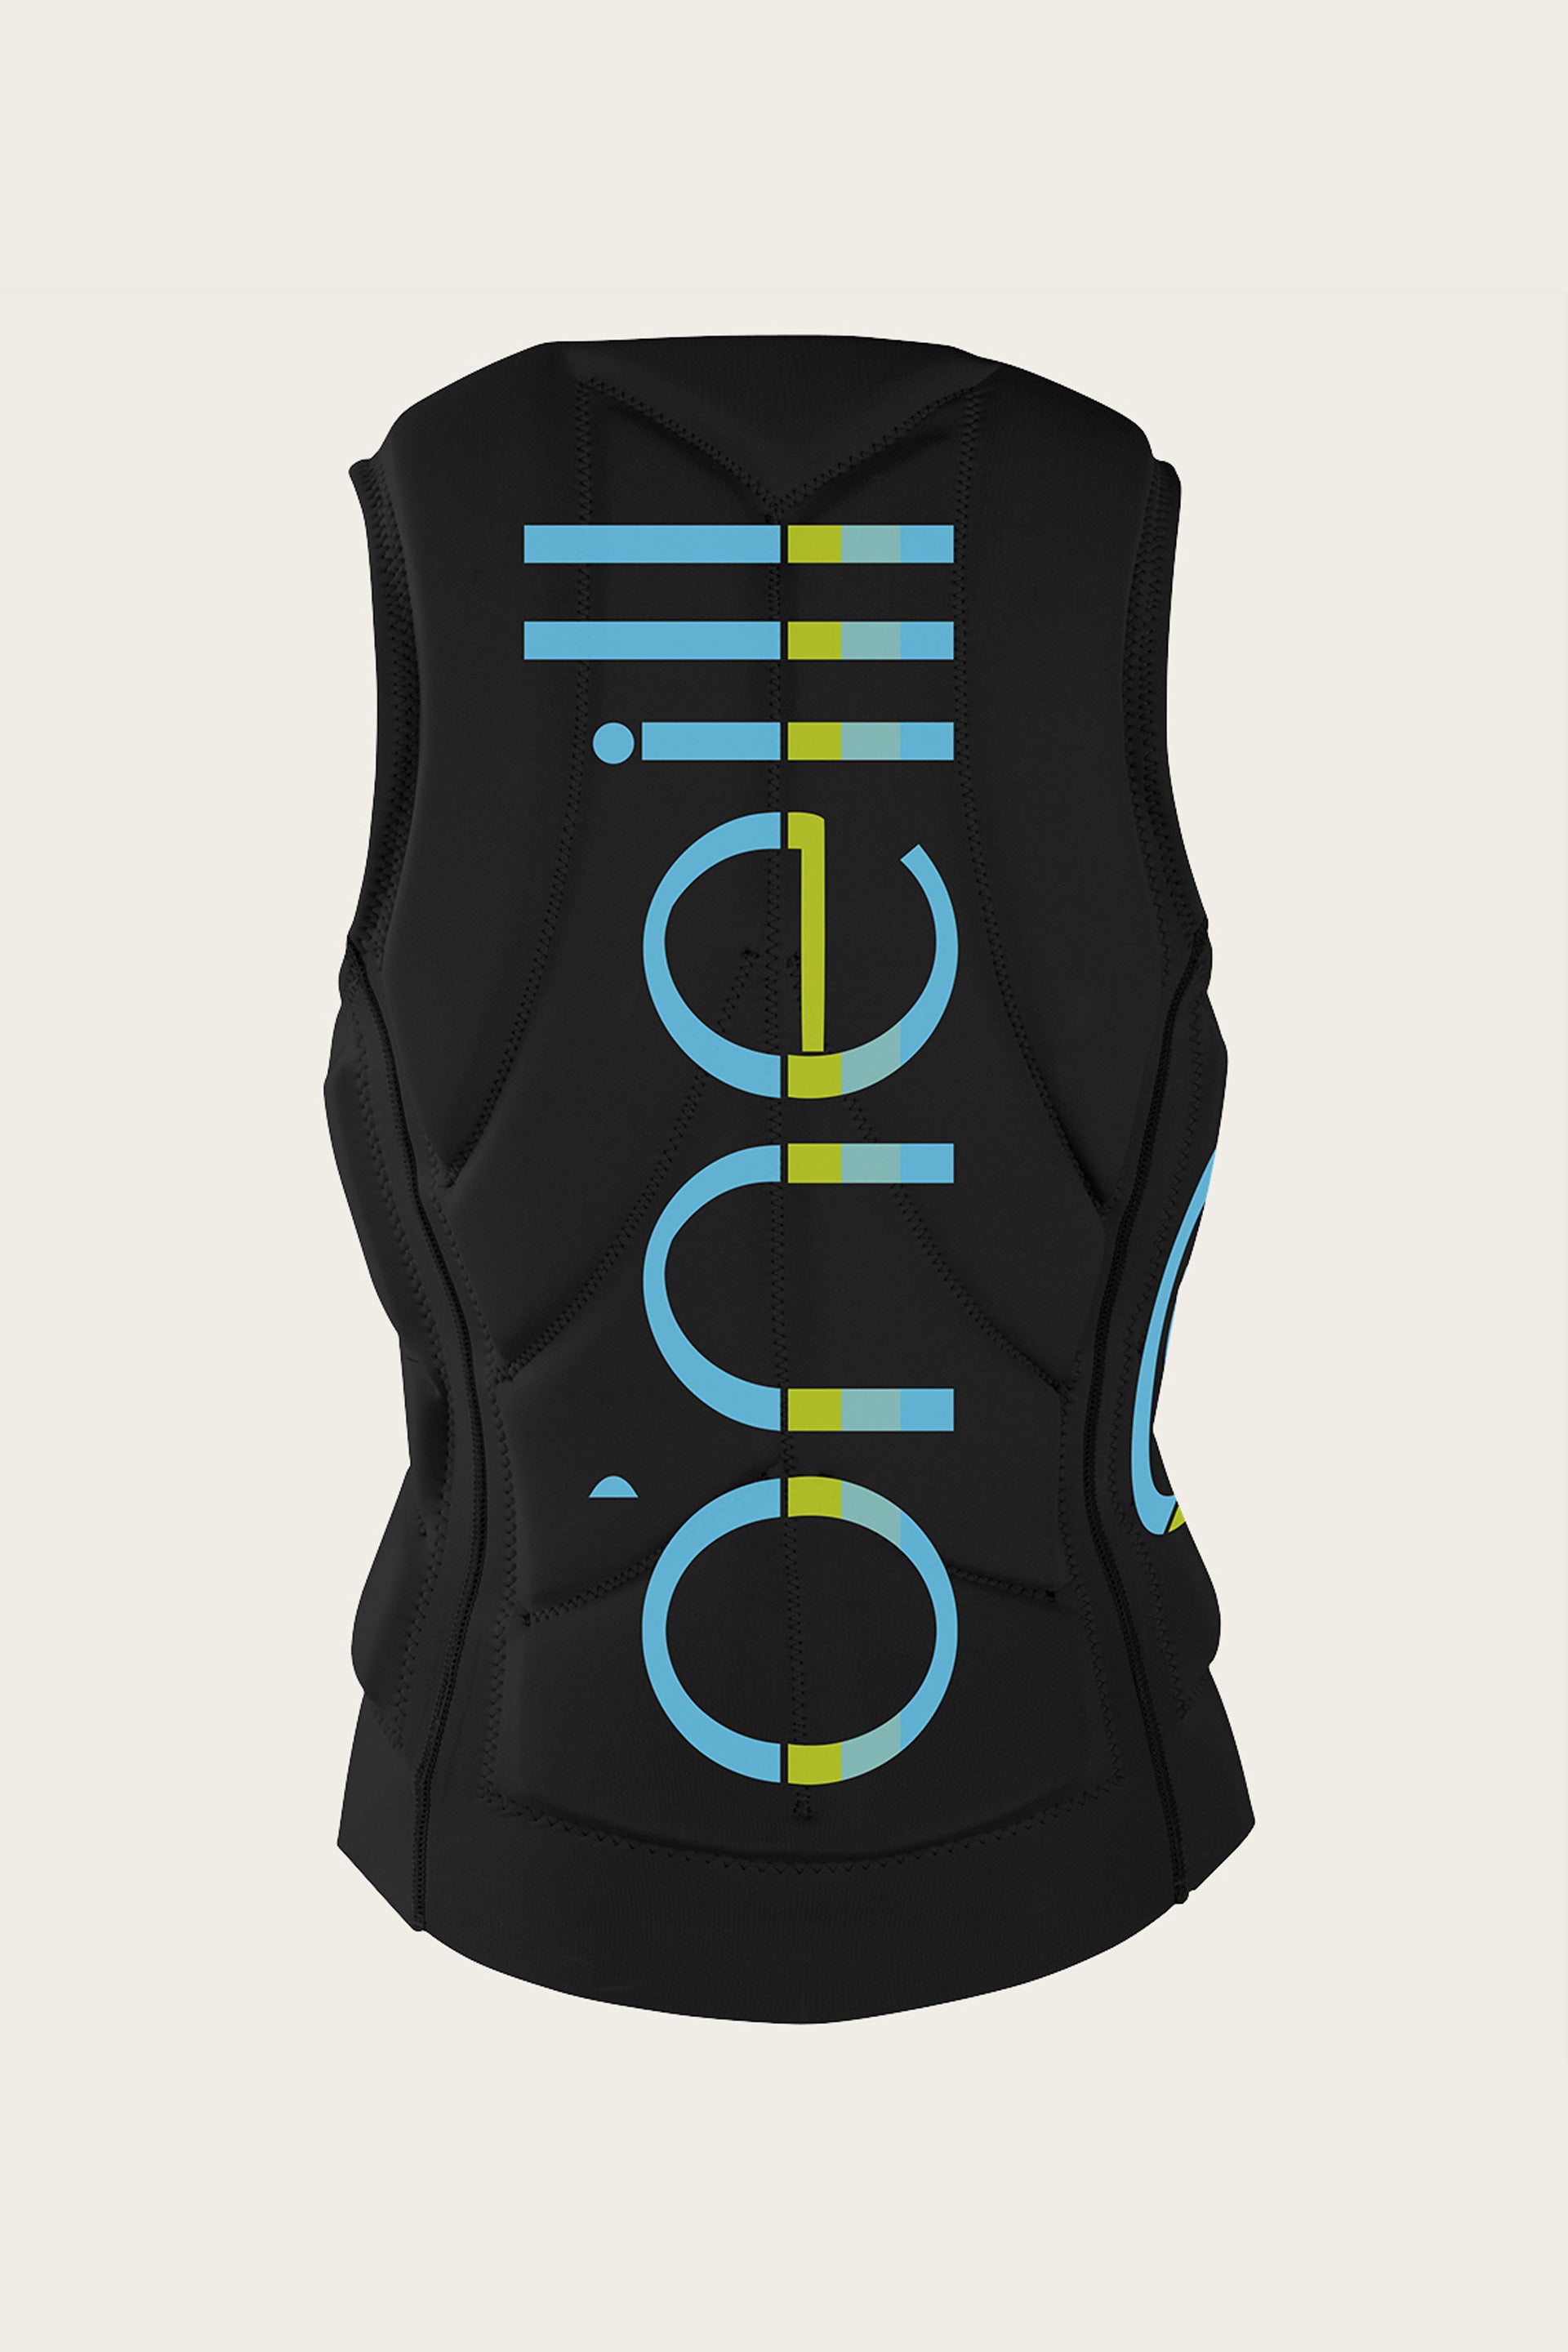 O'Neill Womens Slasher Competition Waterskiing/Wakeboarding Vest, Size 8, Black